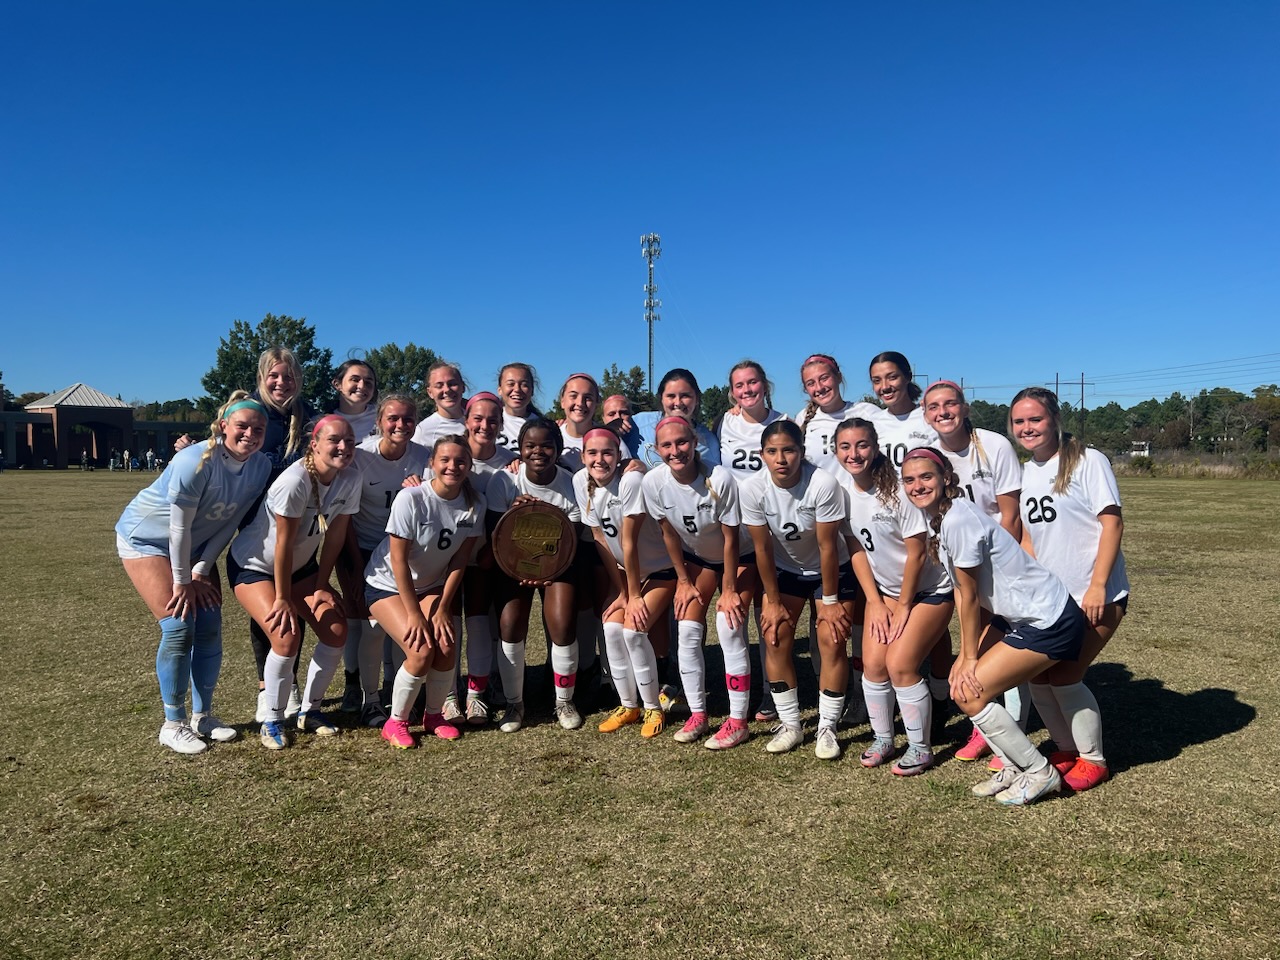 Cape Fear claims the DII Women's Soccer Championship